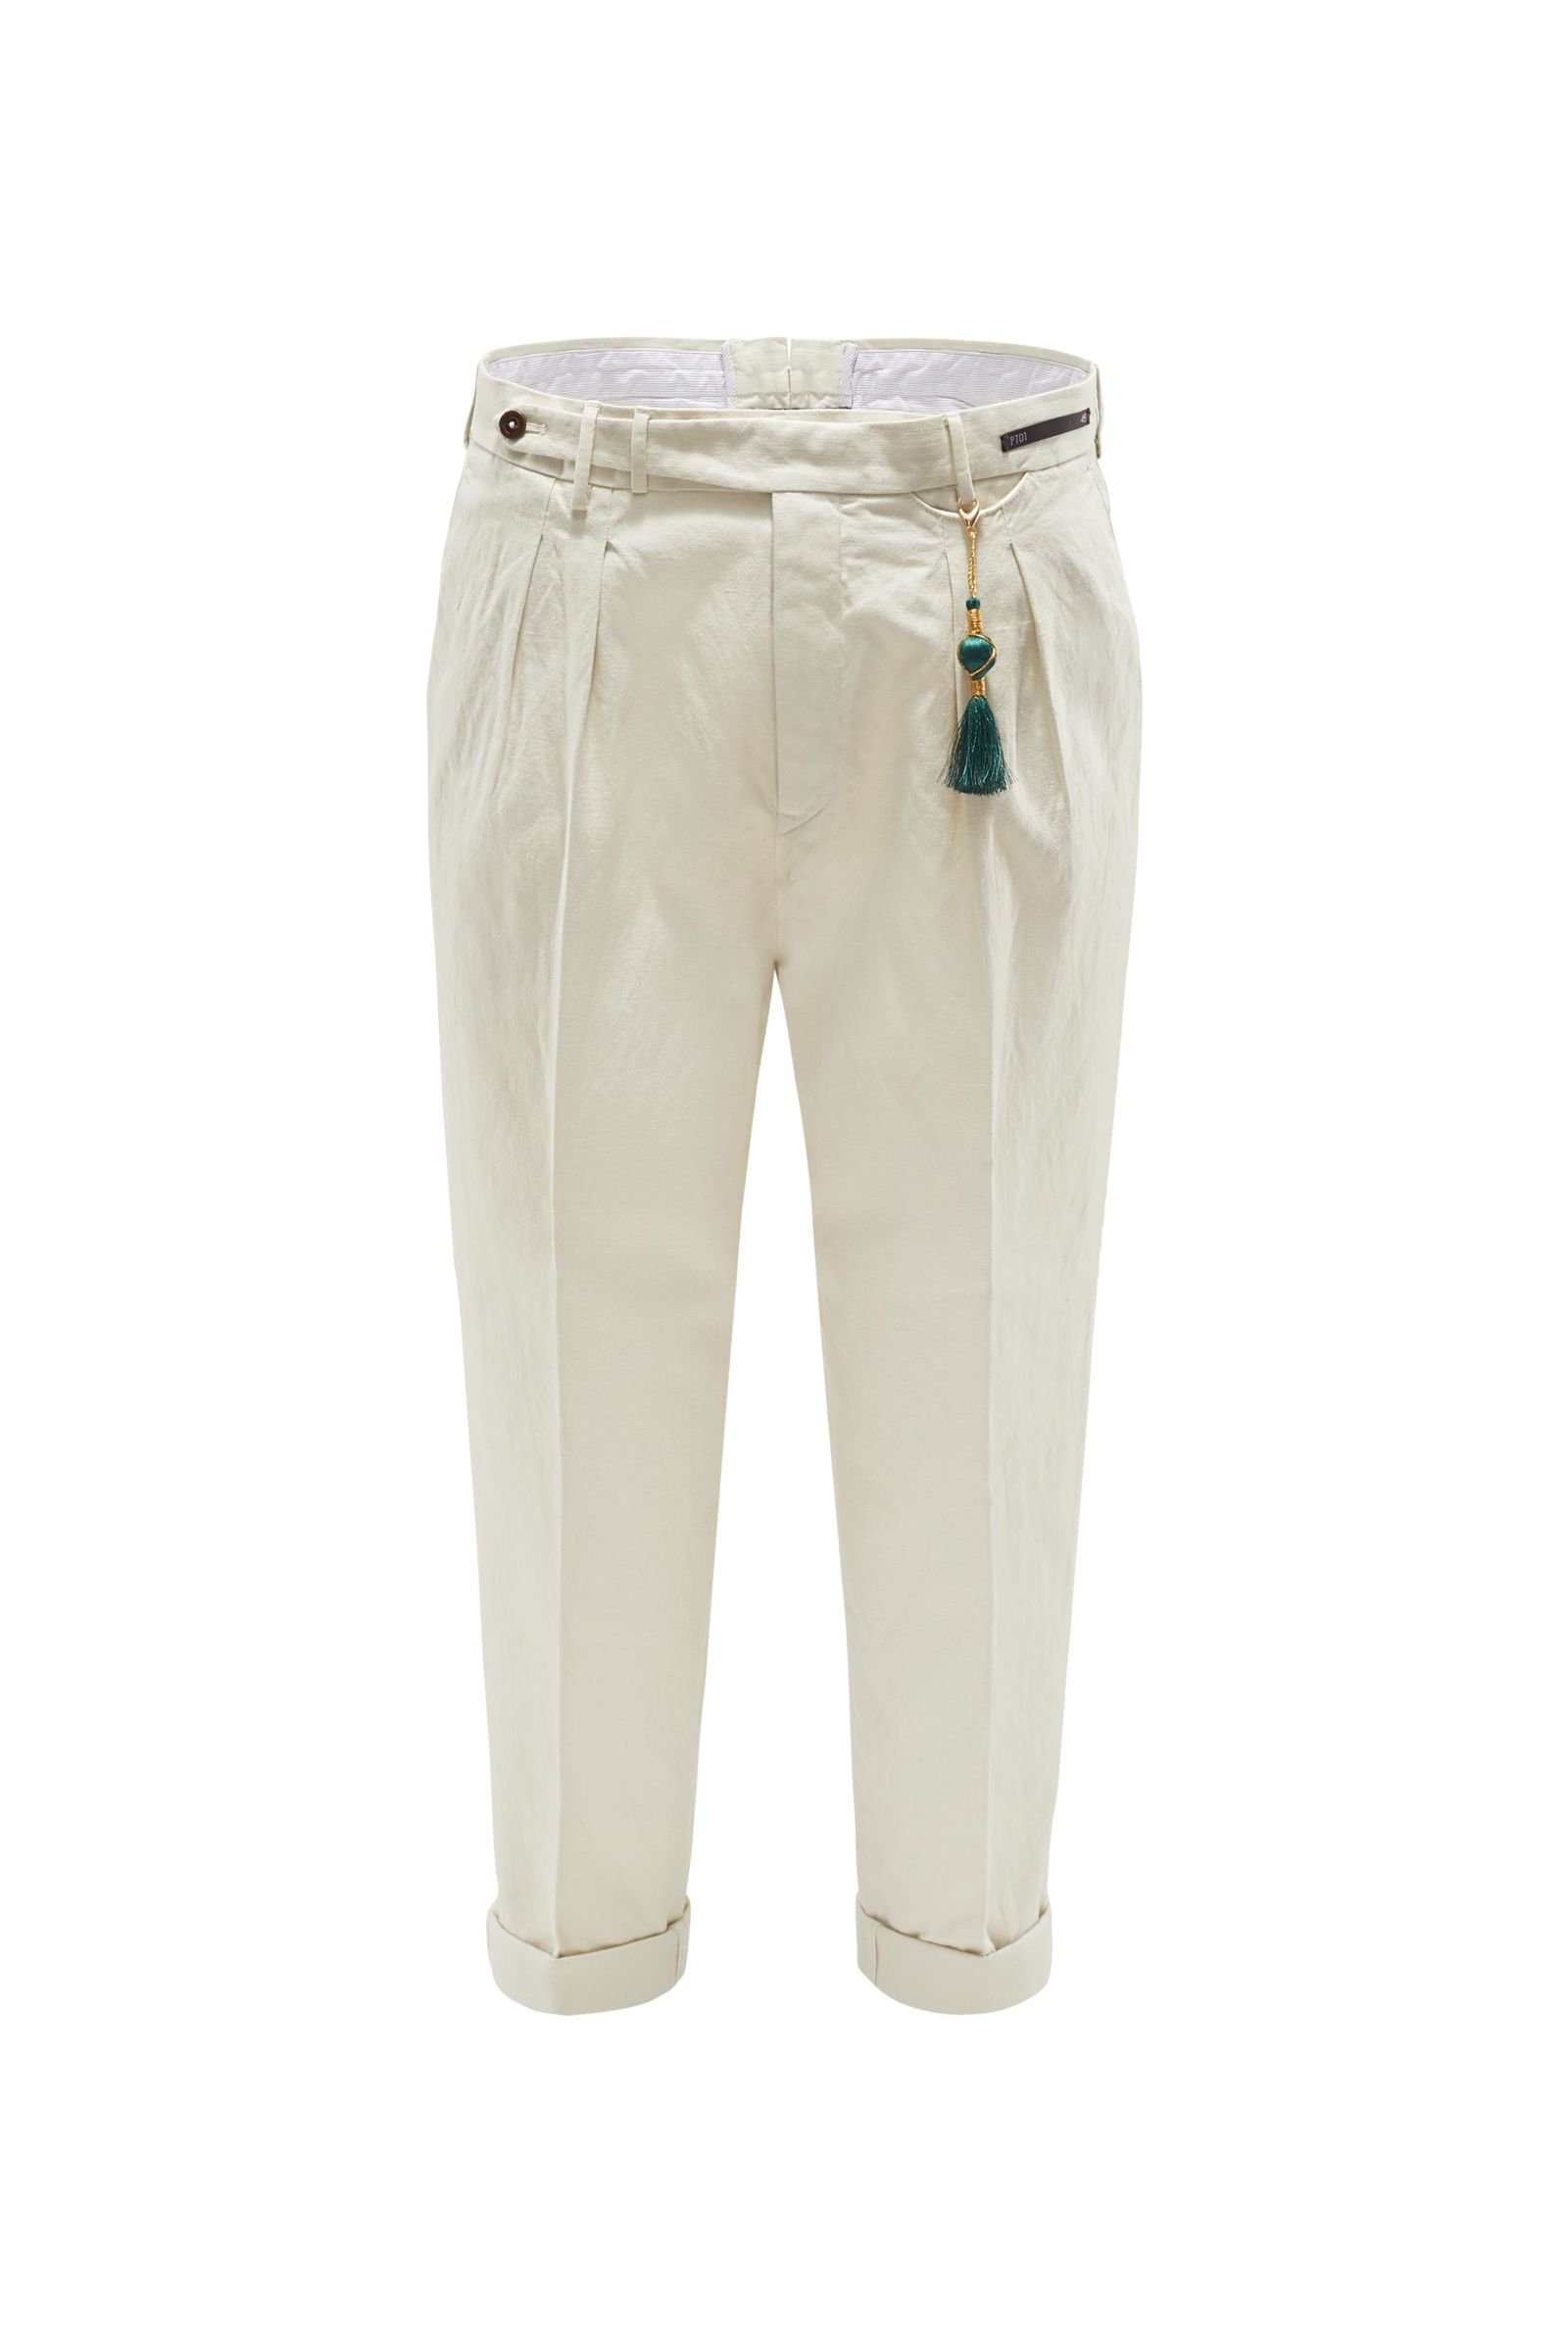 Chambray trousers 'Colonial Party Bombay Hills Carrot Fit' beige